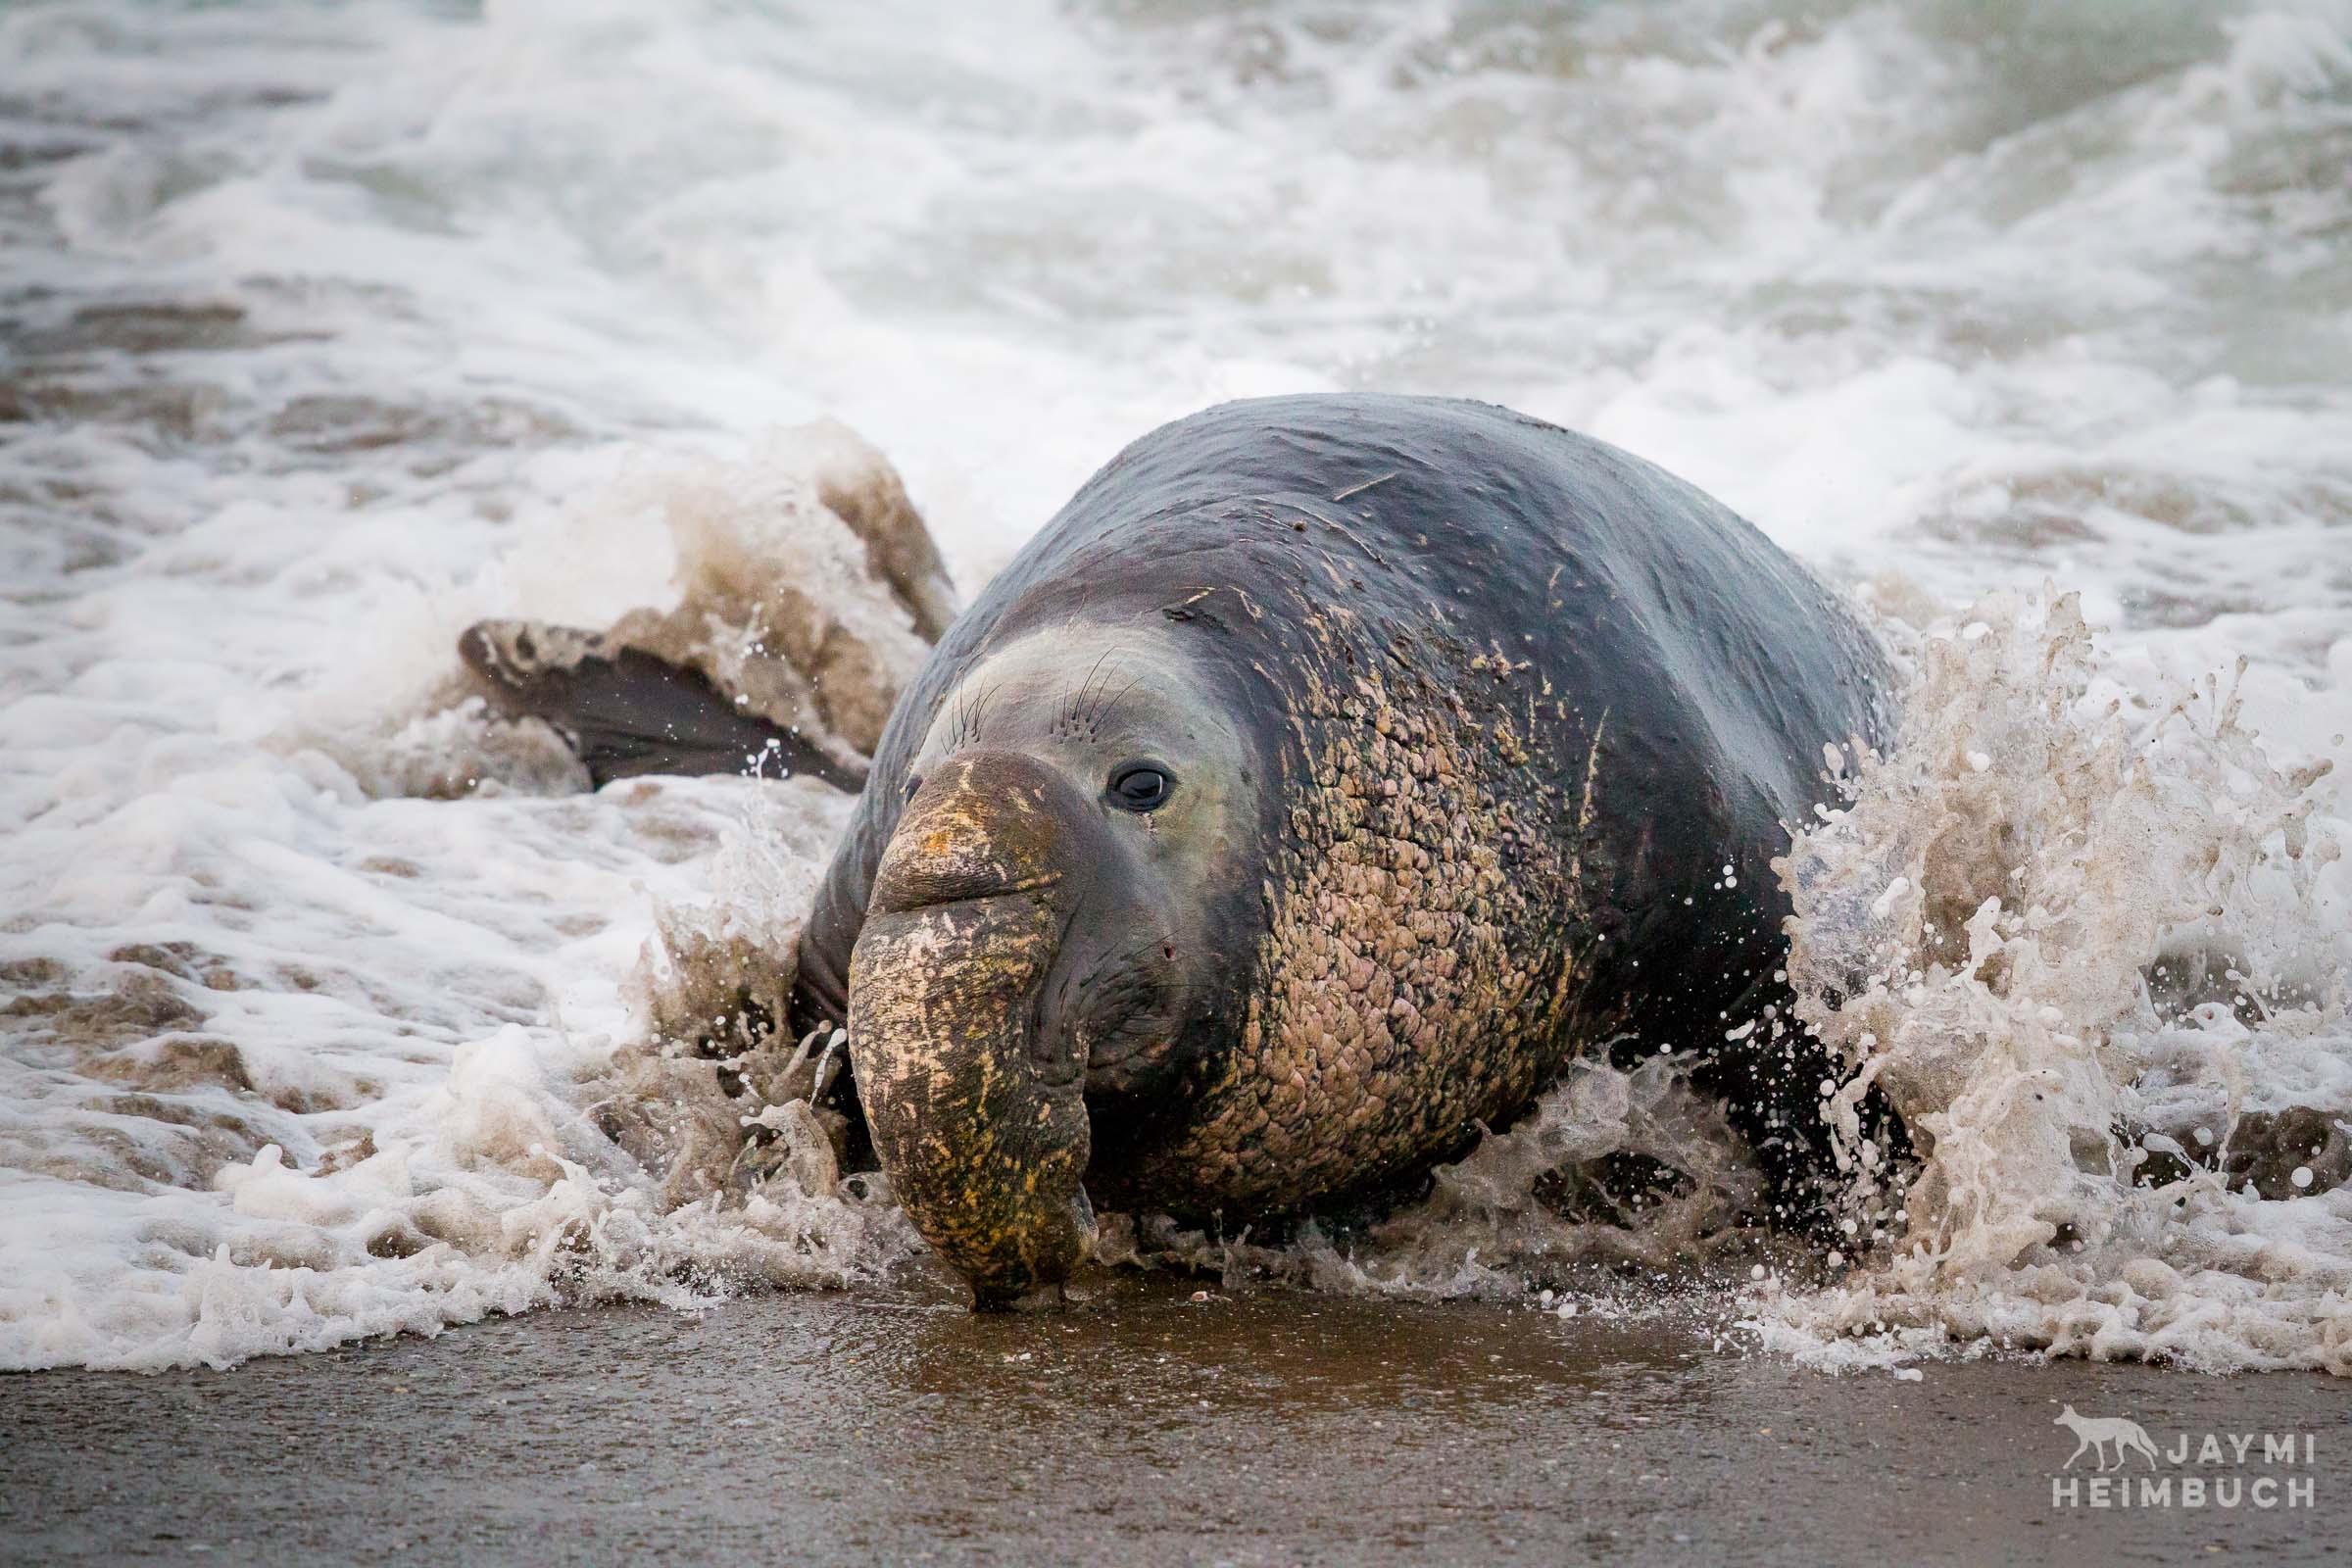 A male northern elephant seal (Mirounga angustirostris) exits the ocean surf onto the beach